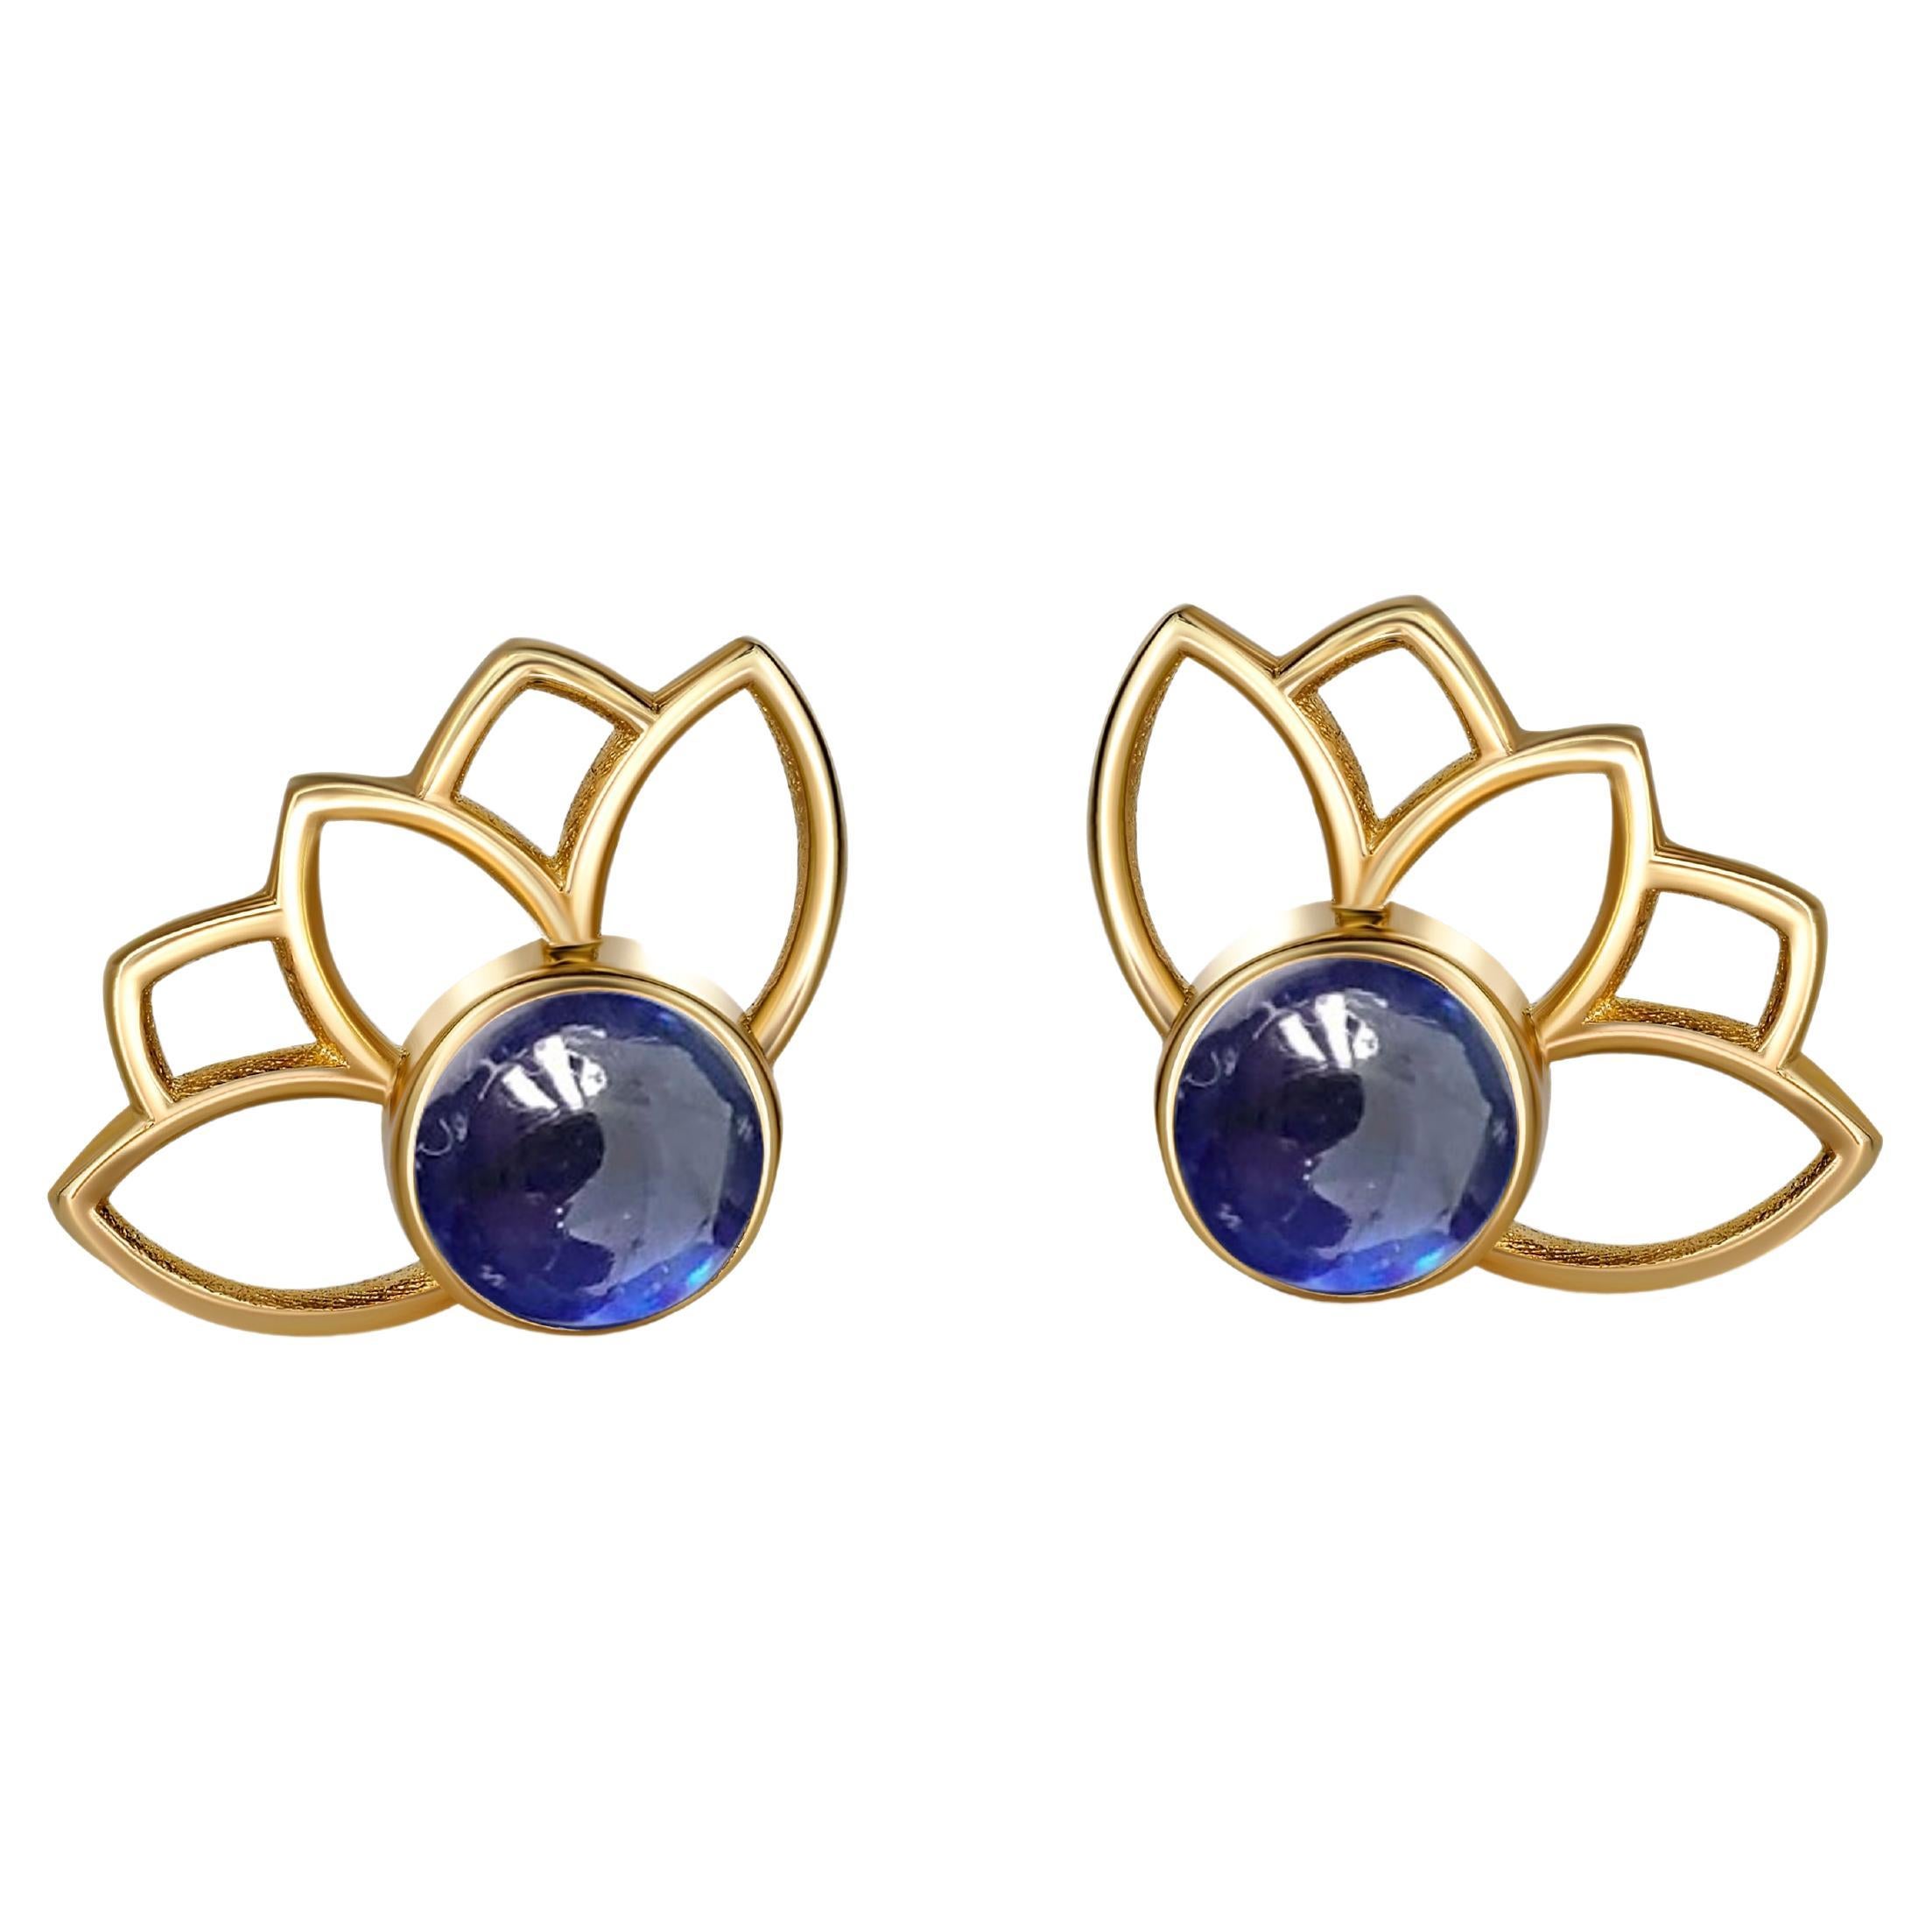 Lotus earrings studs with sapphires in 14k gold. 